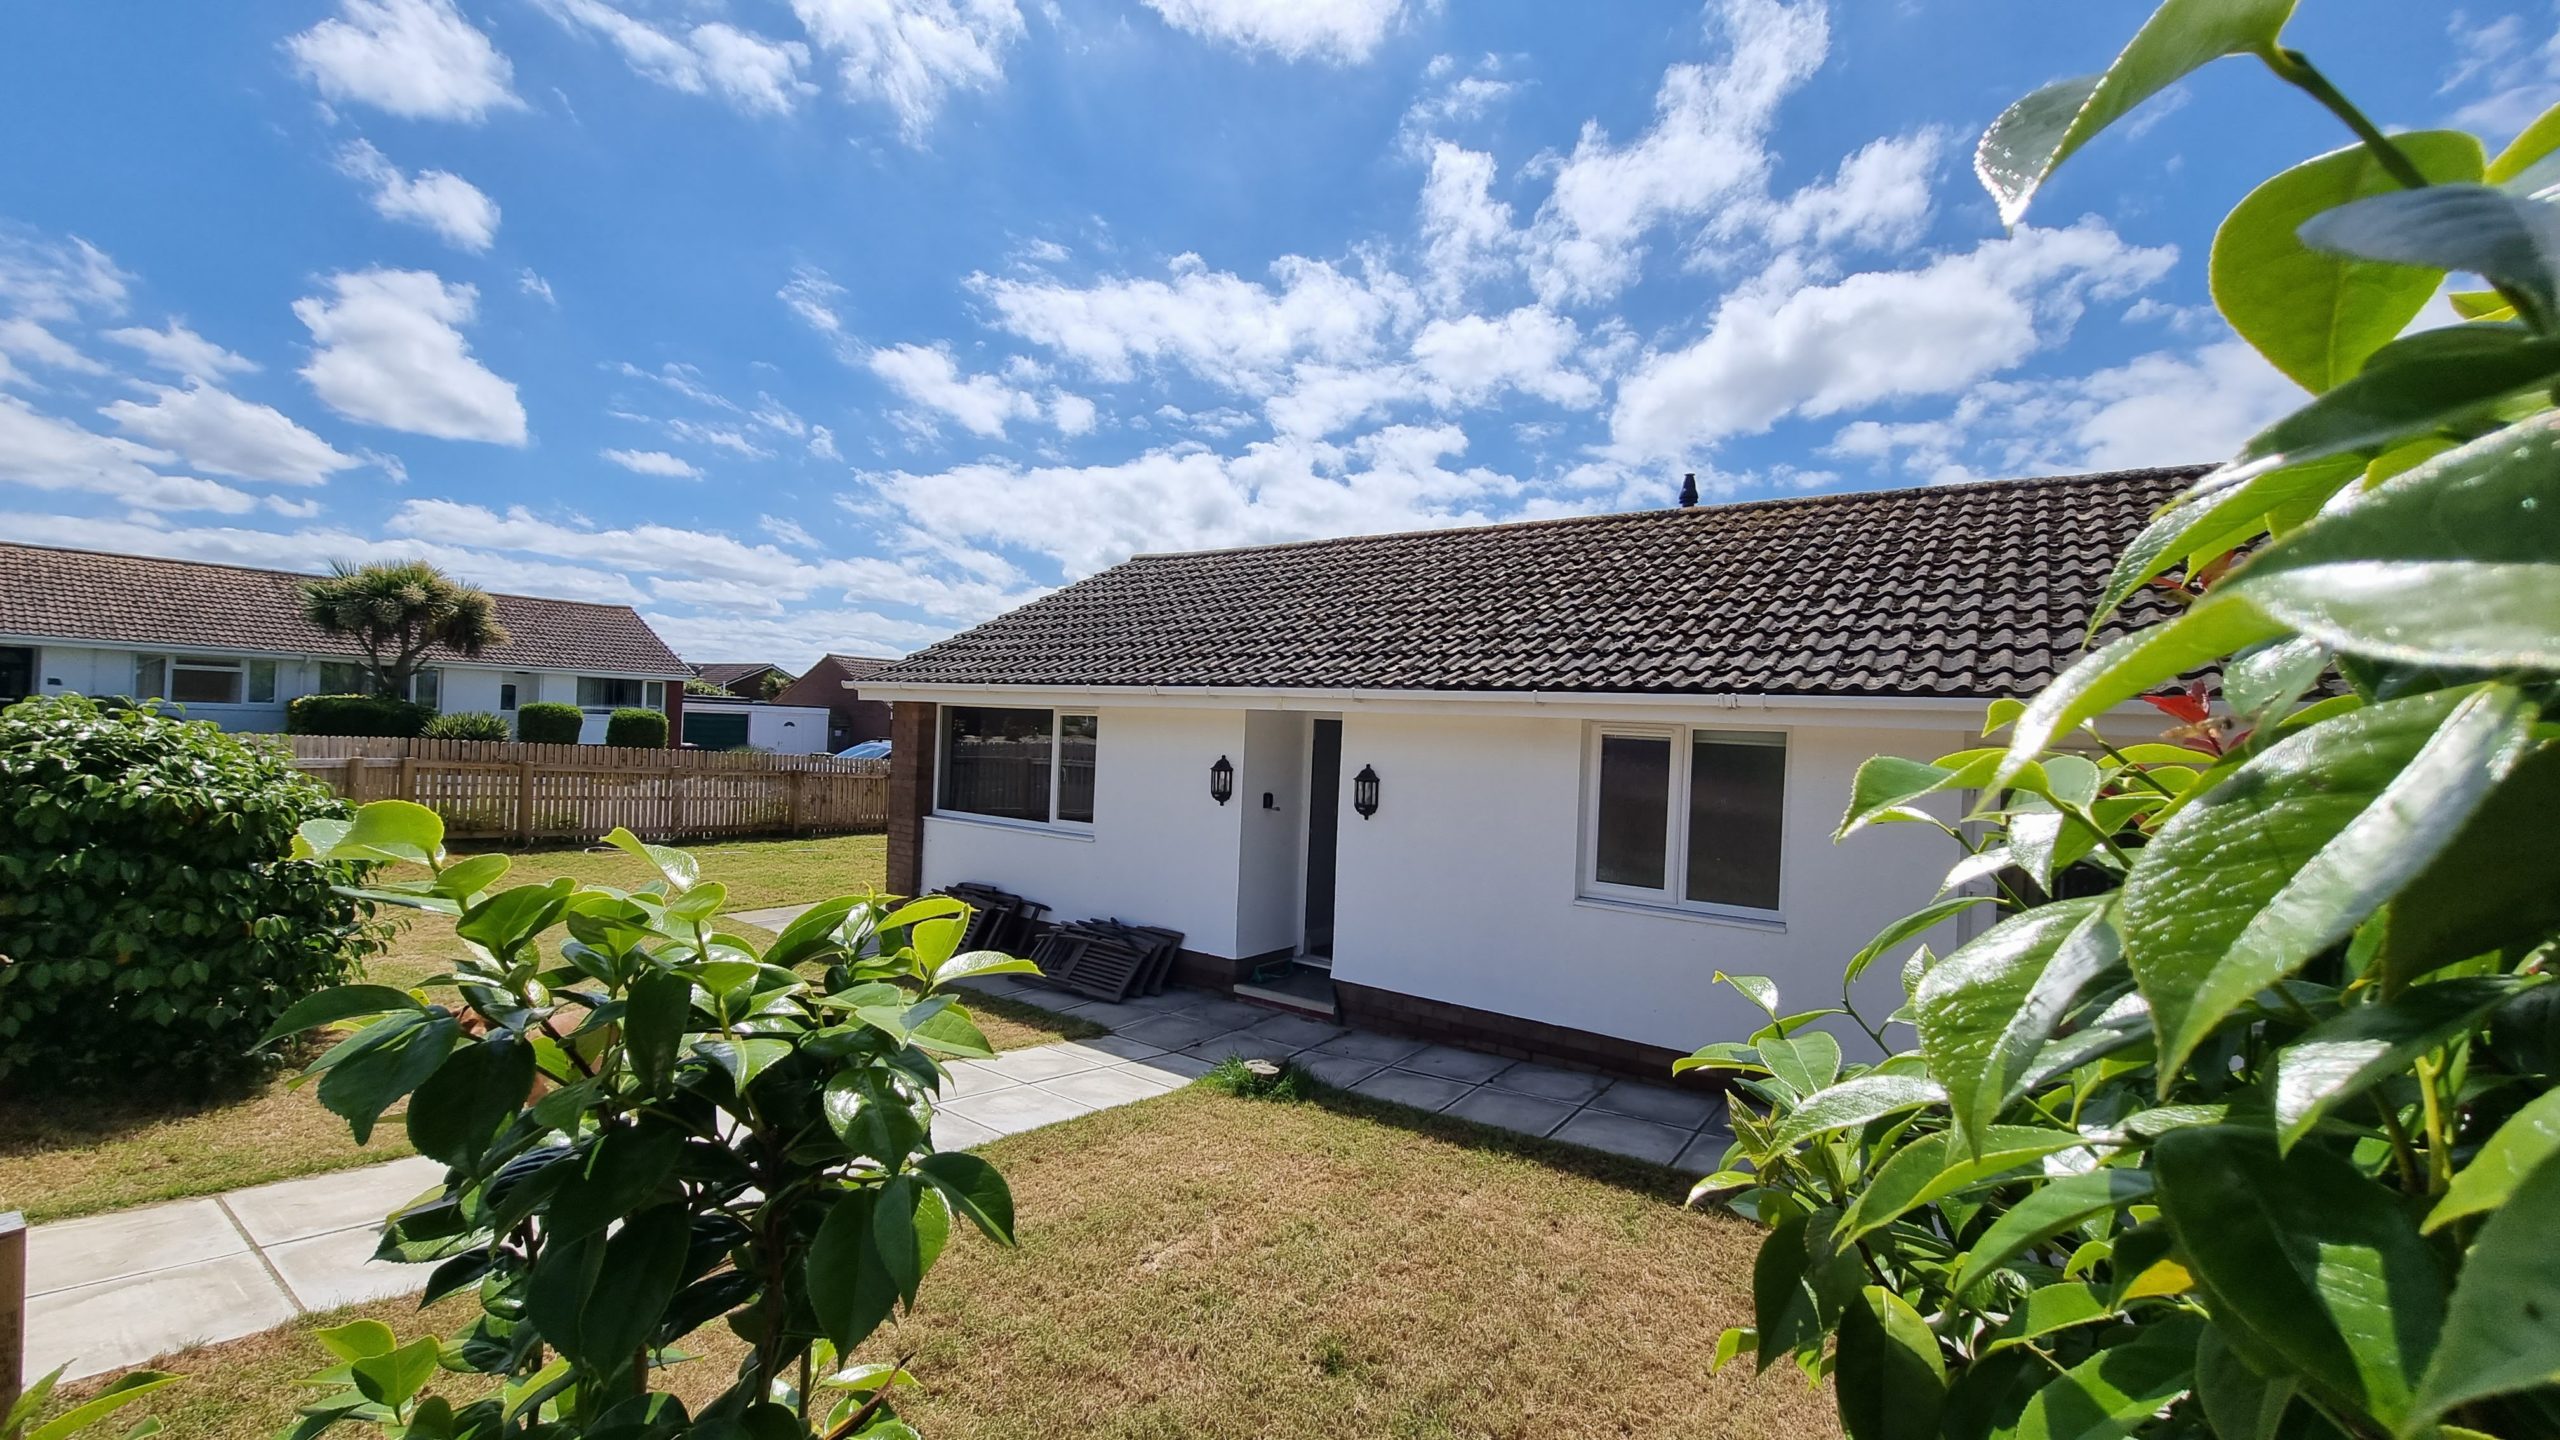 Disabled Holidays - Accessible Bungalow near Saunton- Devon - Owners Direct, England